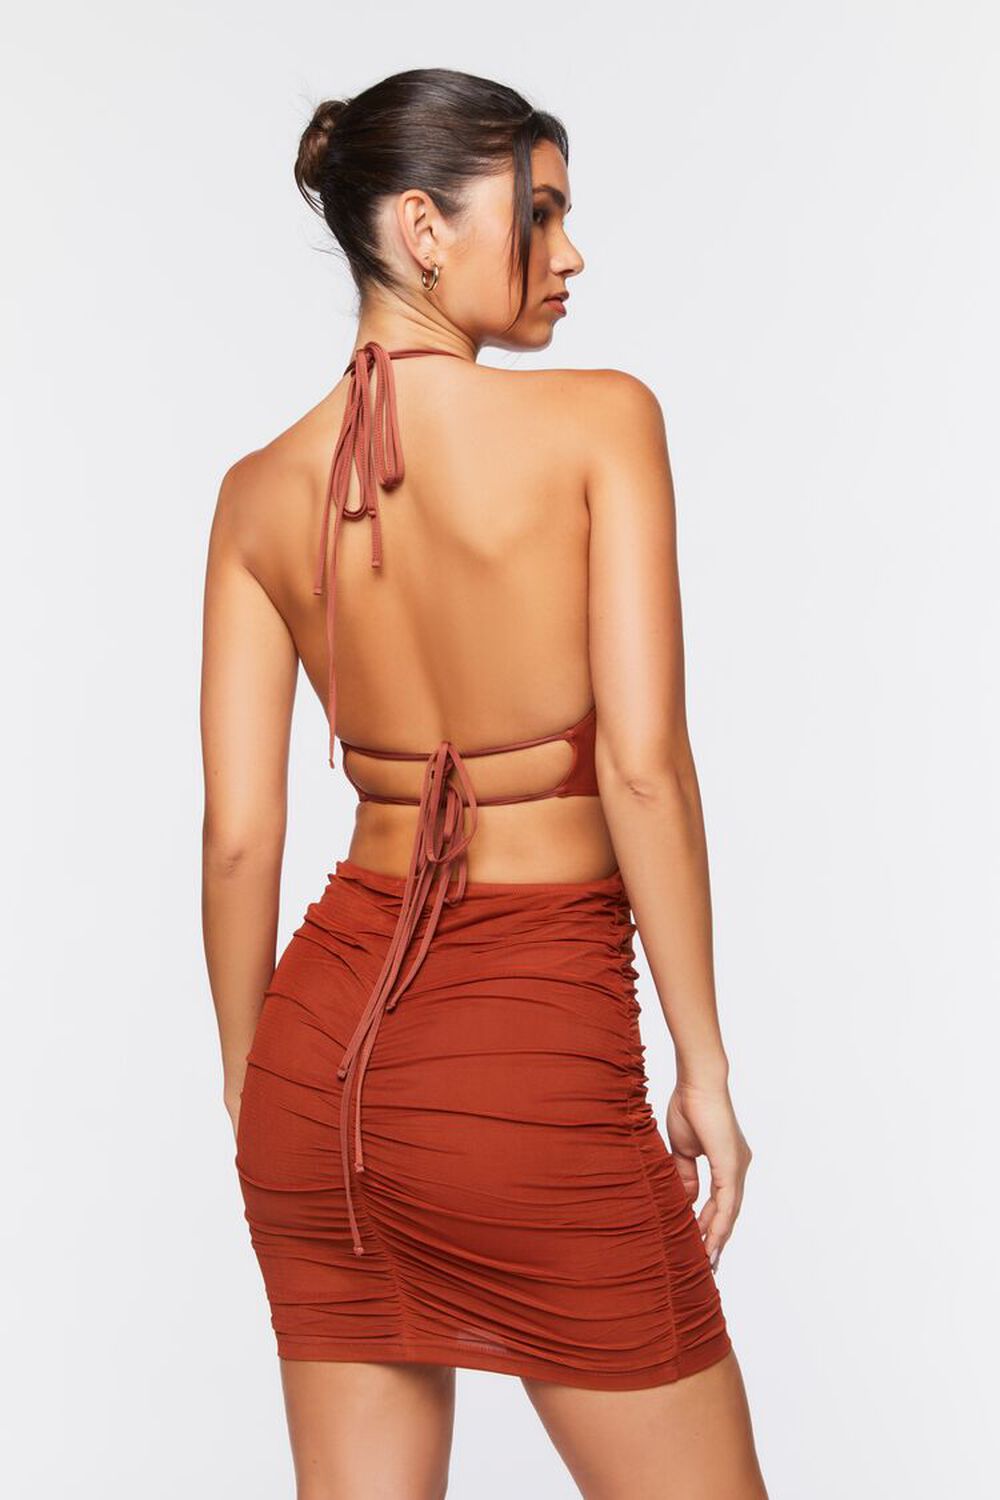 BROWN Ruched Mini Bodycon Dress, image 3